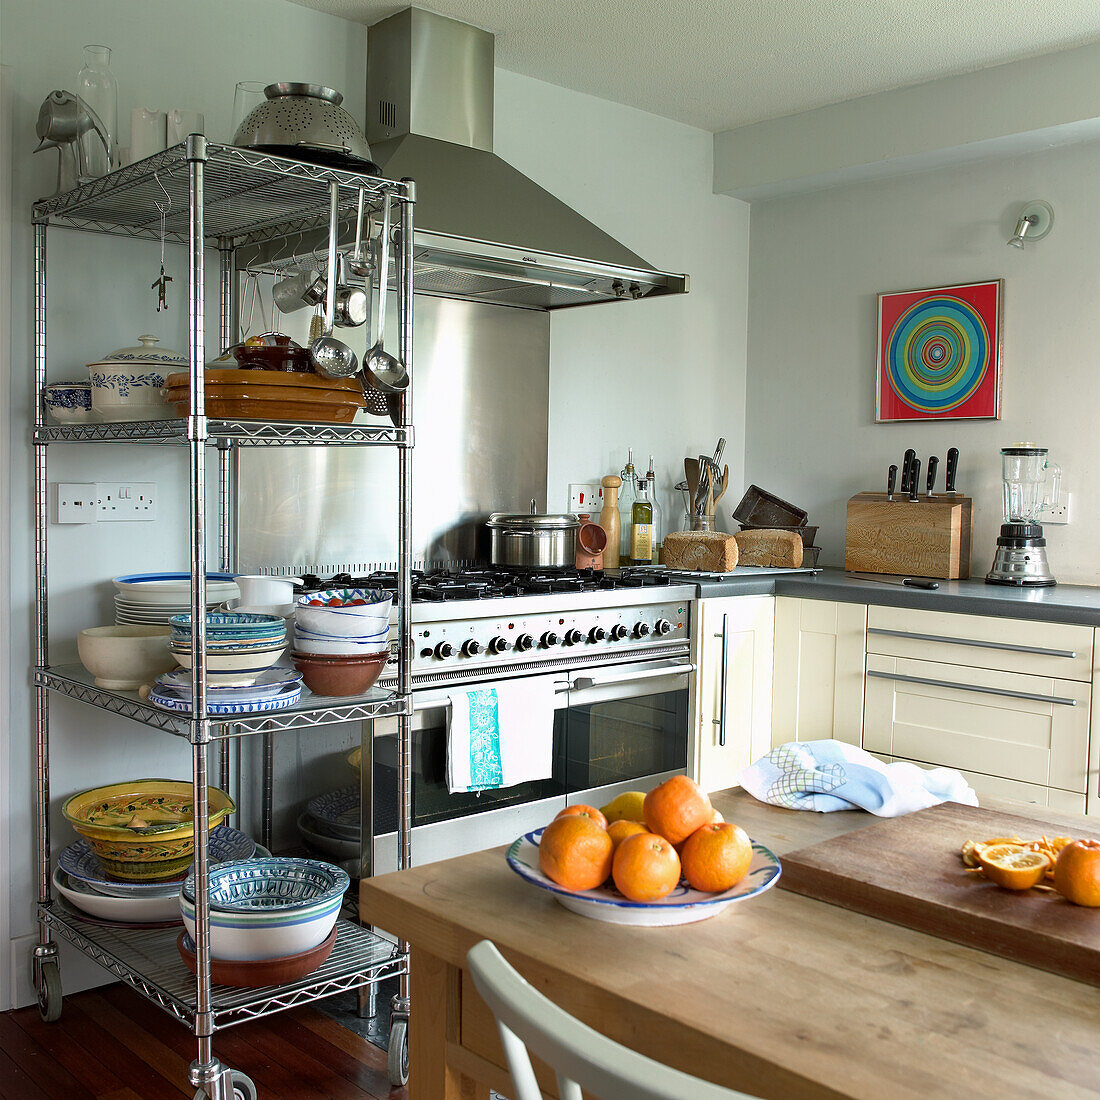 Kitchen with stainless steel shelving and colorful wall art